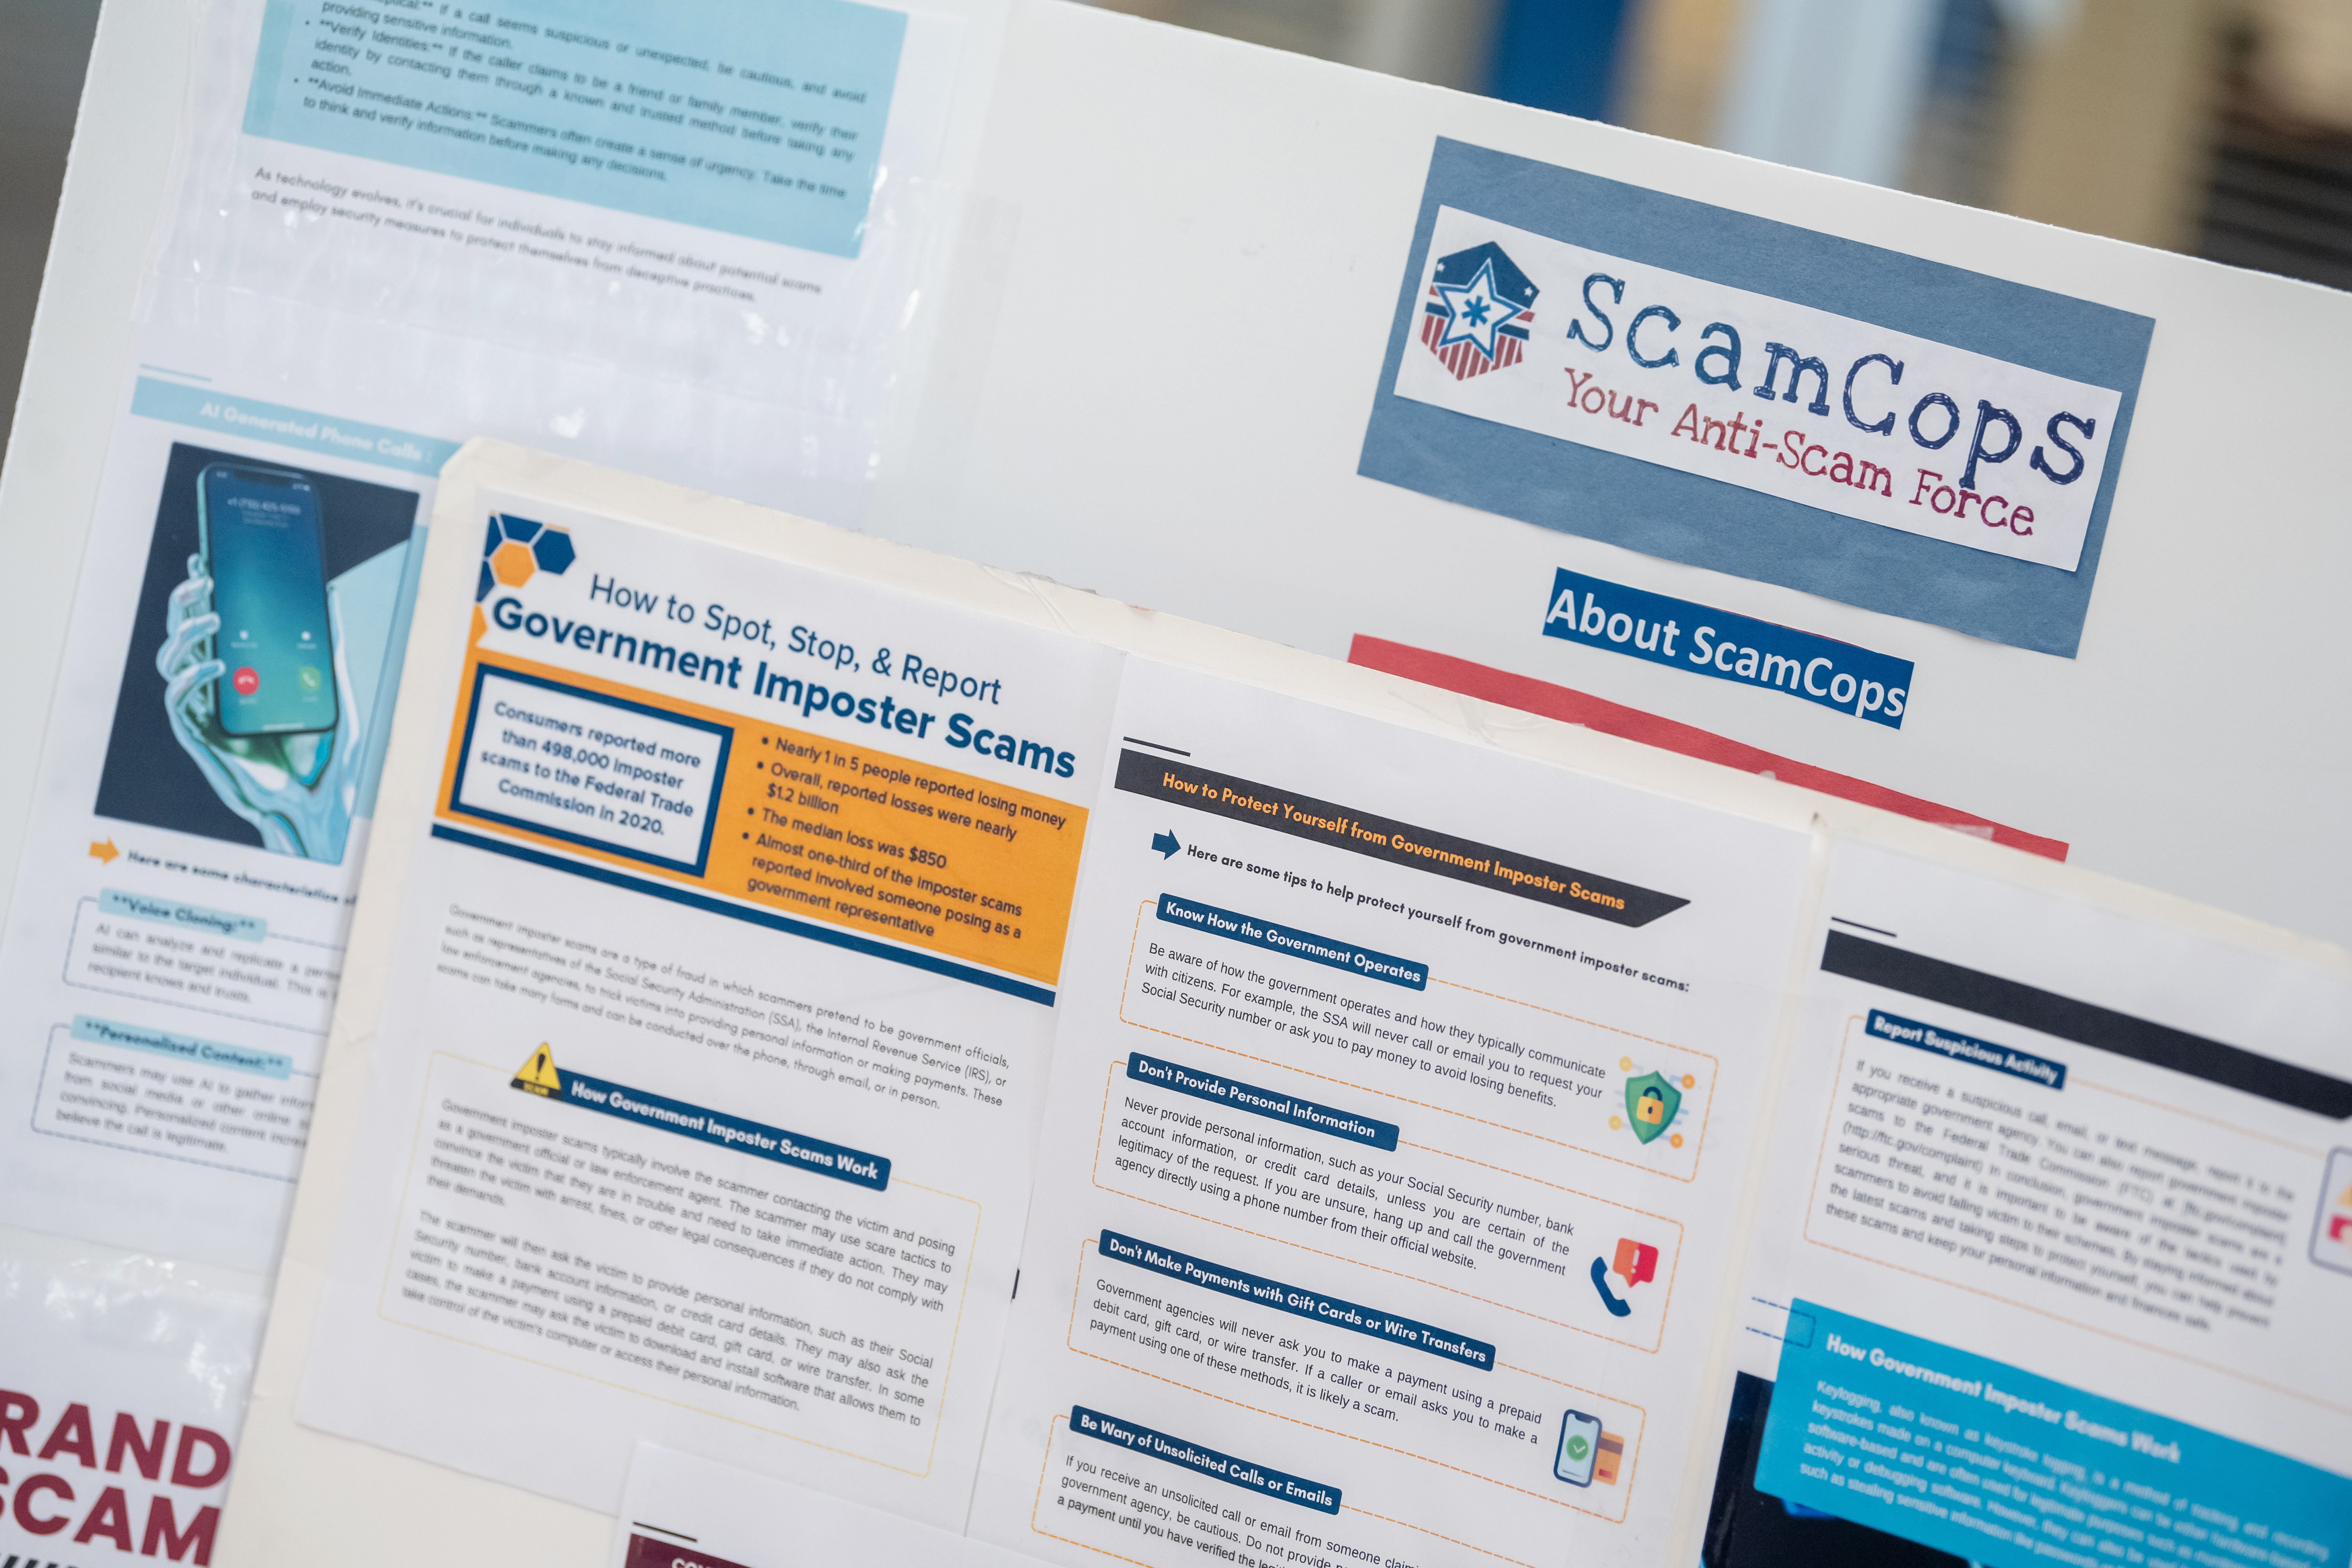 A poster board details the website ScamCops and lists many common scams.